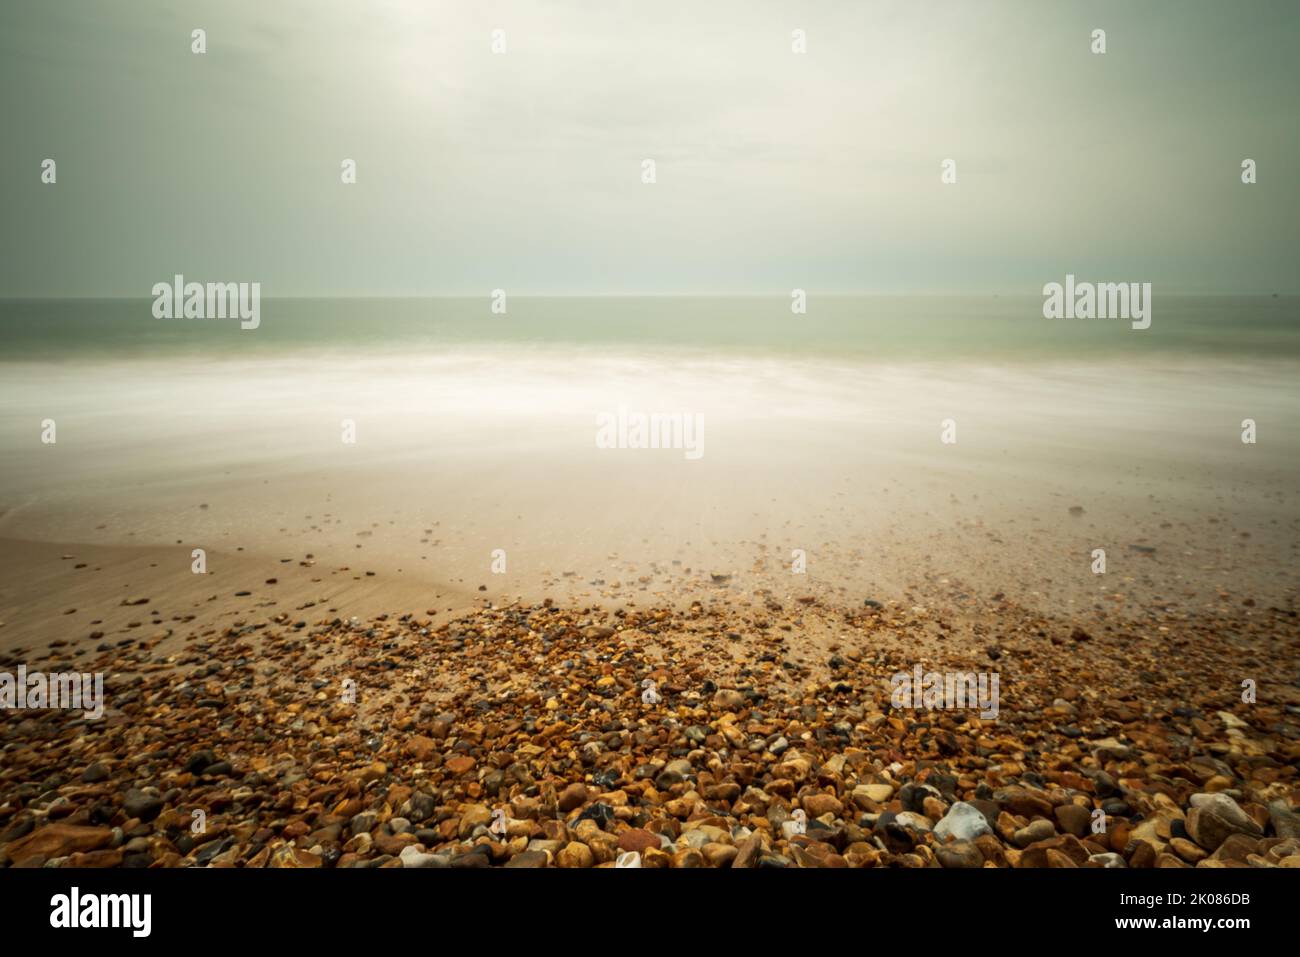 Pebbles on a beach, smooth sea, soft, blurred, dreamy Stock Photo